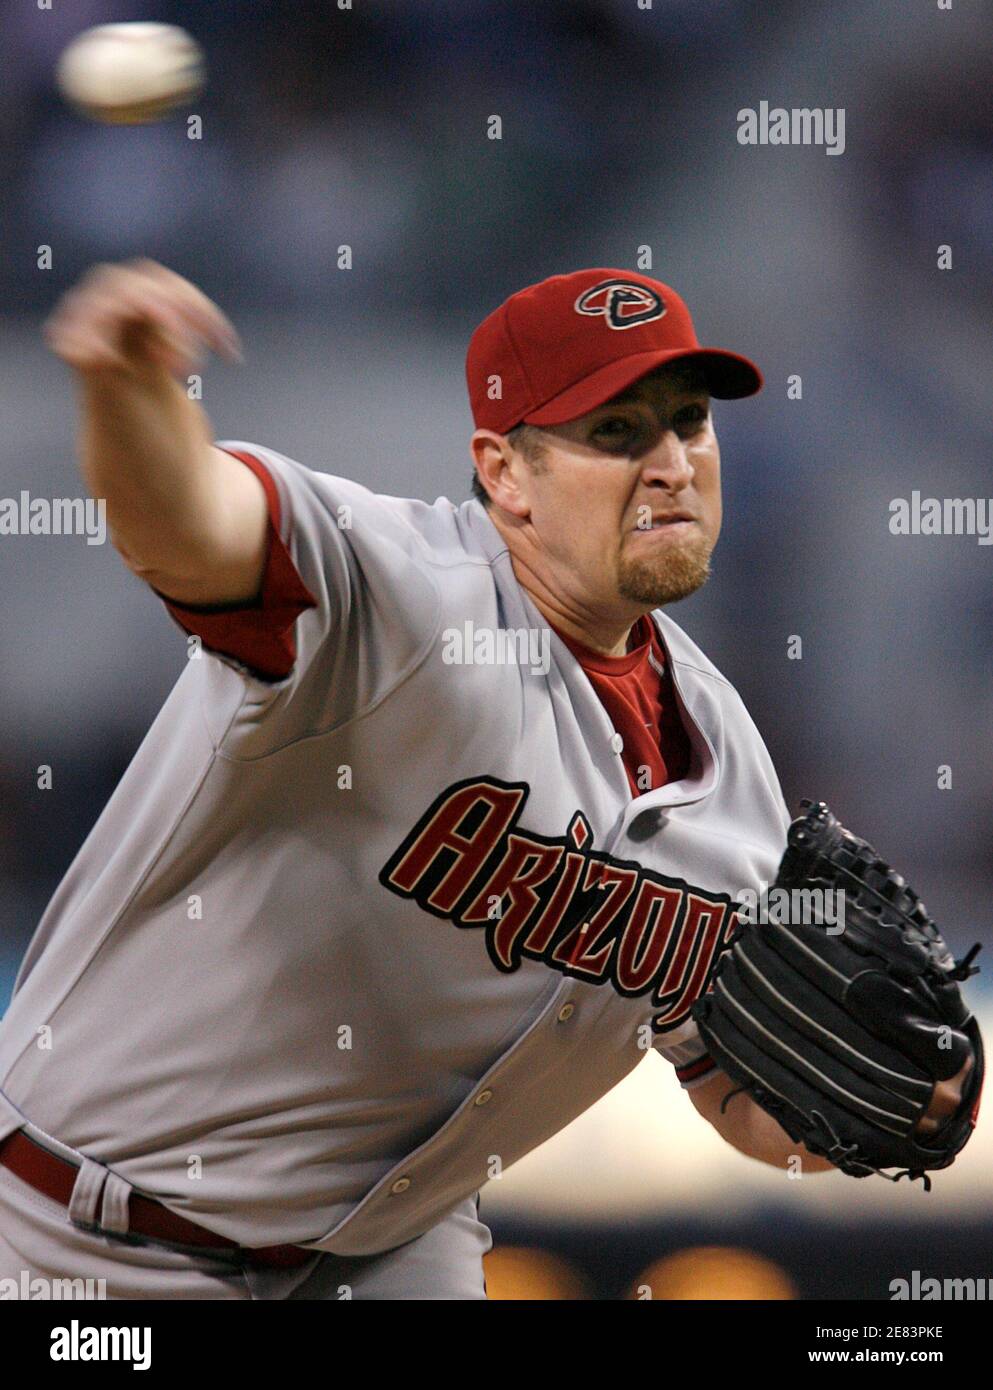 Arizona Diamondbacks starting pitcher Brandon Webb, the 2006  National League Cy Young award winner, faces San Diego Padres in the first inning during their National League baseball game in San Diego, California April 18, 2007 .          REUTERS/Mike Blake             (UNITED STATES) Stock Photo